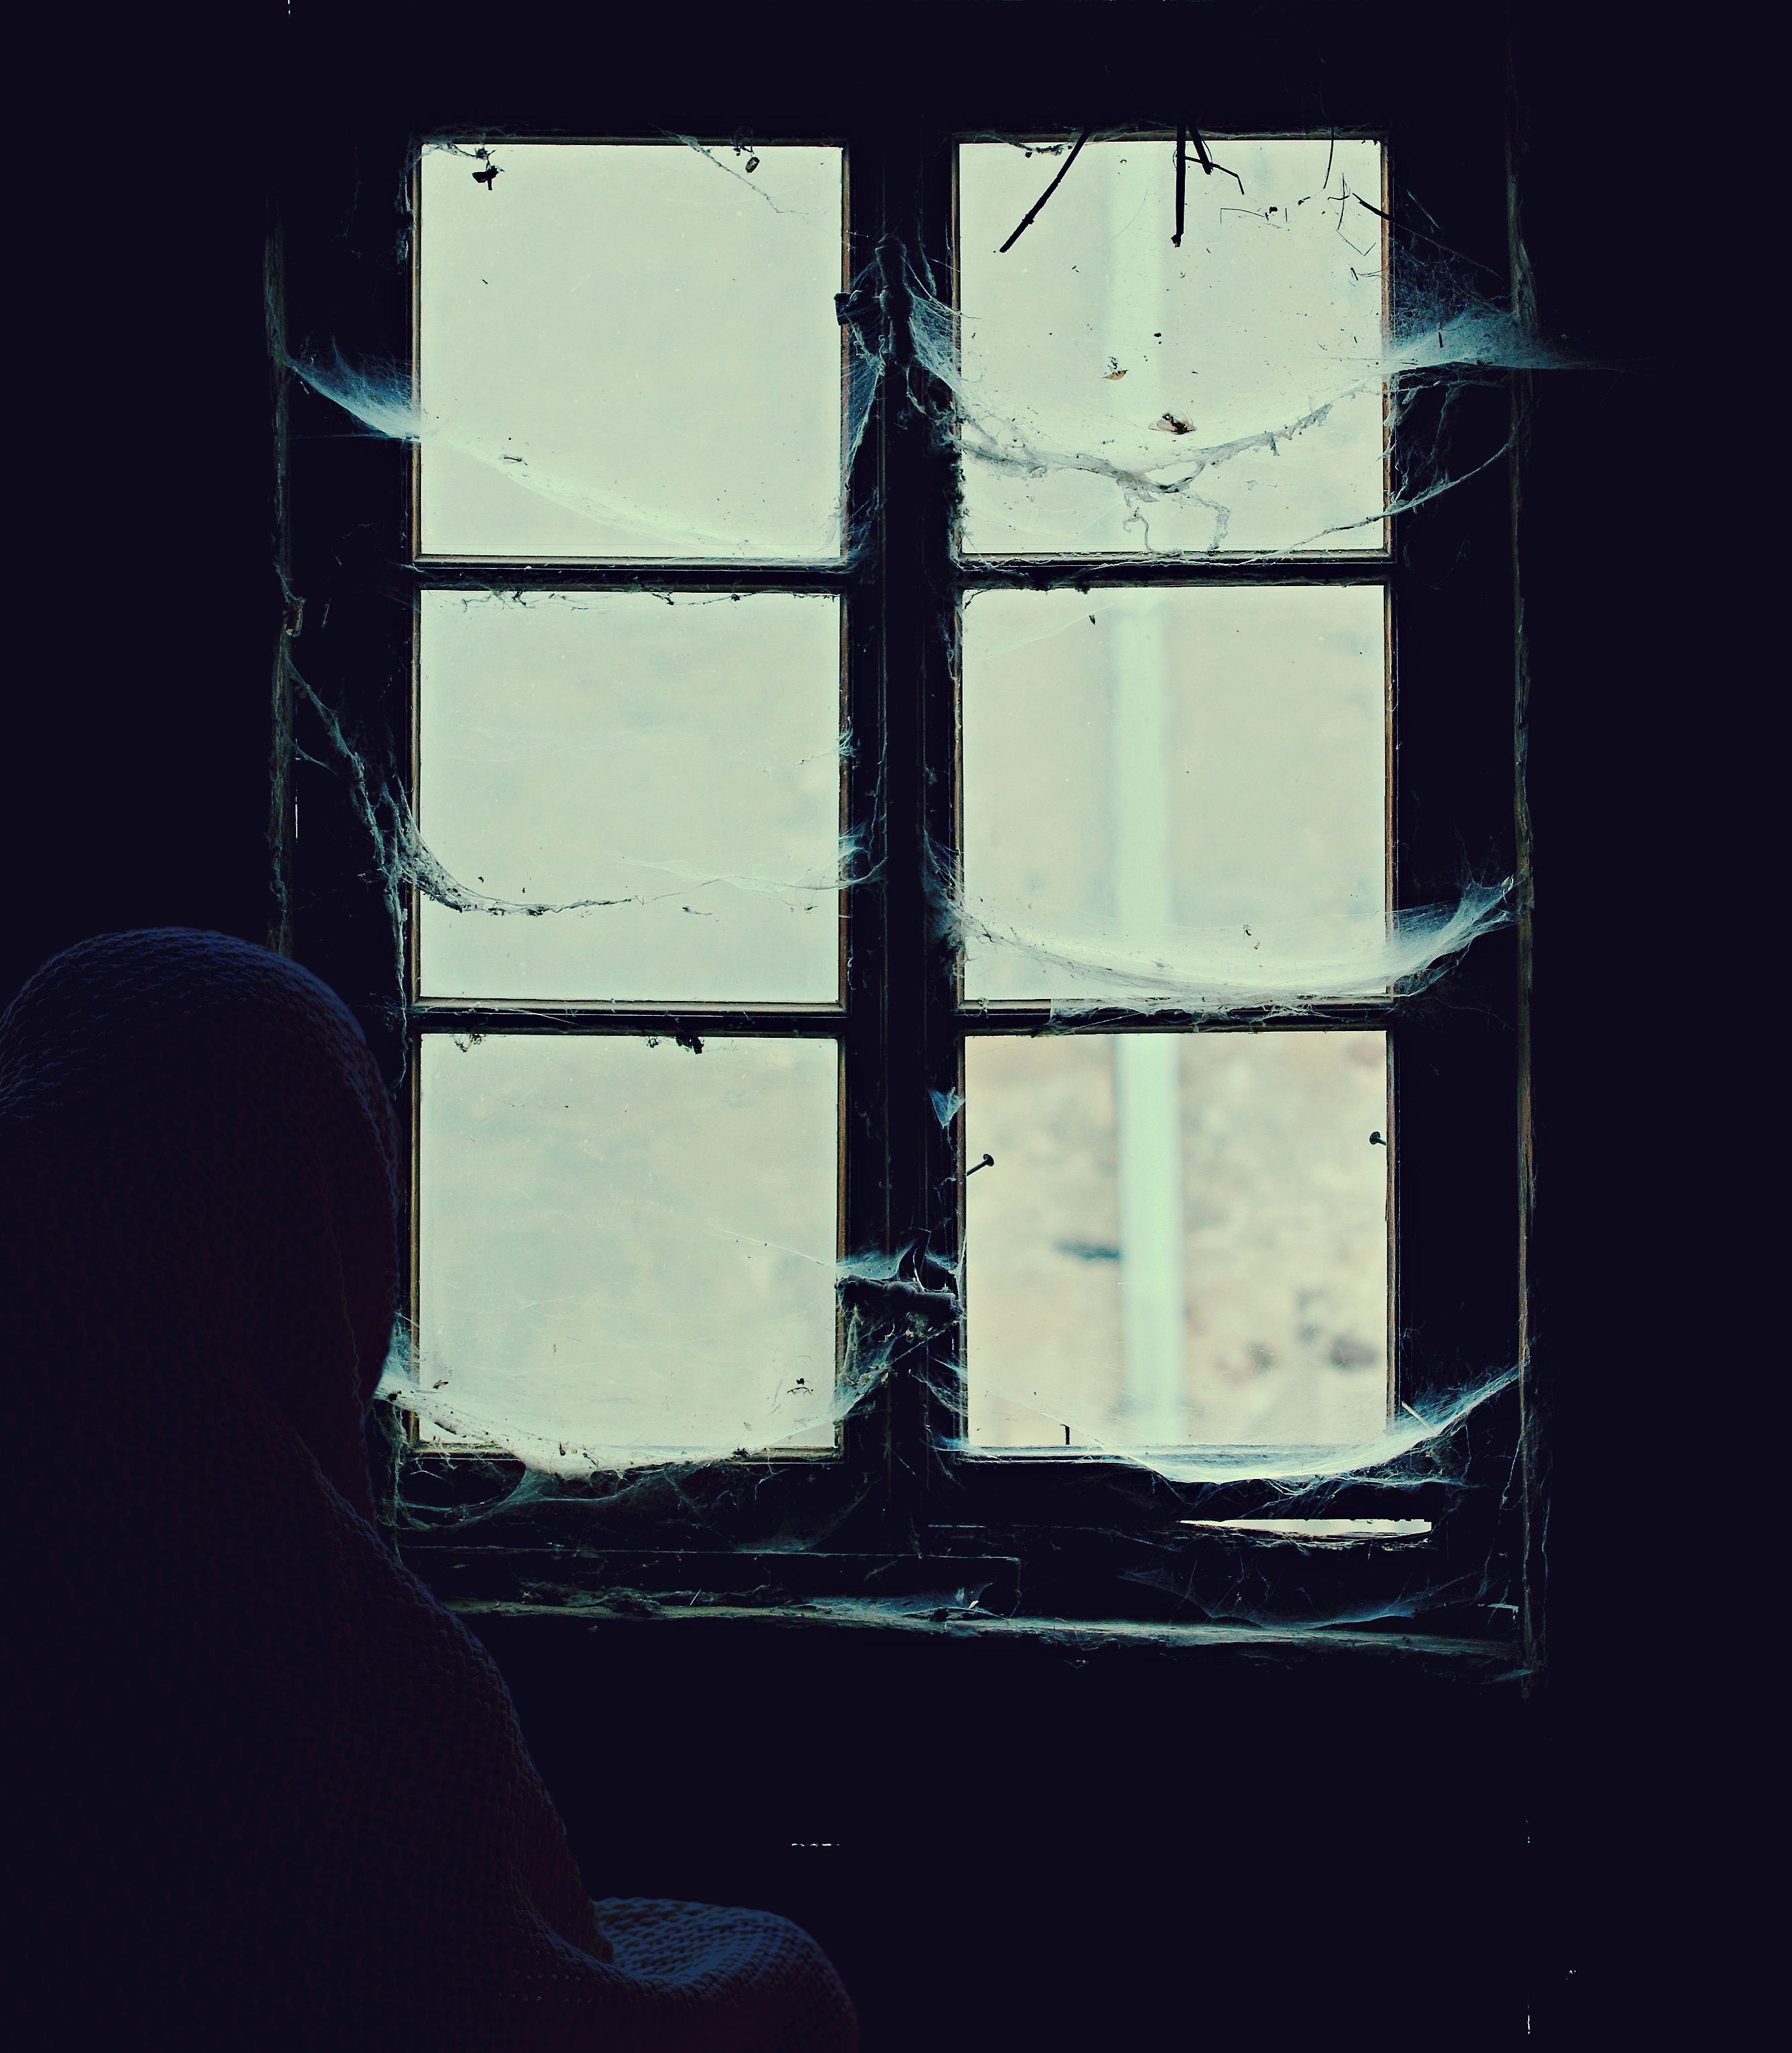 miscellanea, despair, hopelessness, loneliness, web, abandoned, window, lonely, miscellaneous, alone